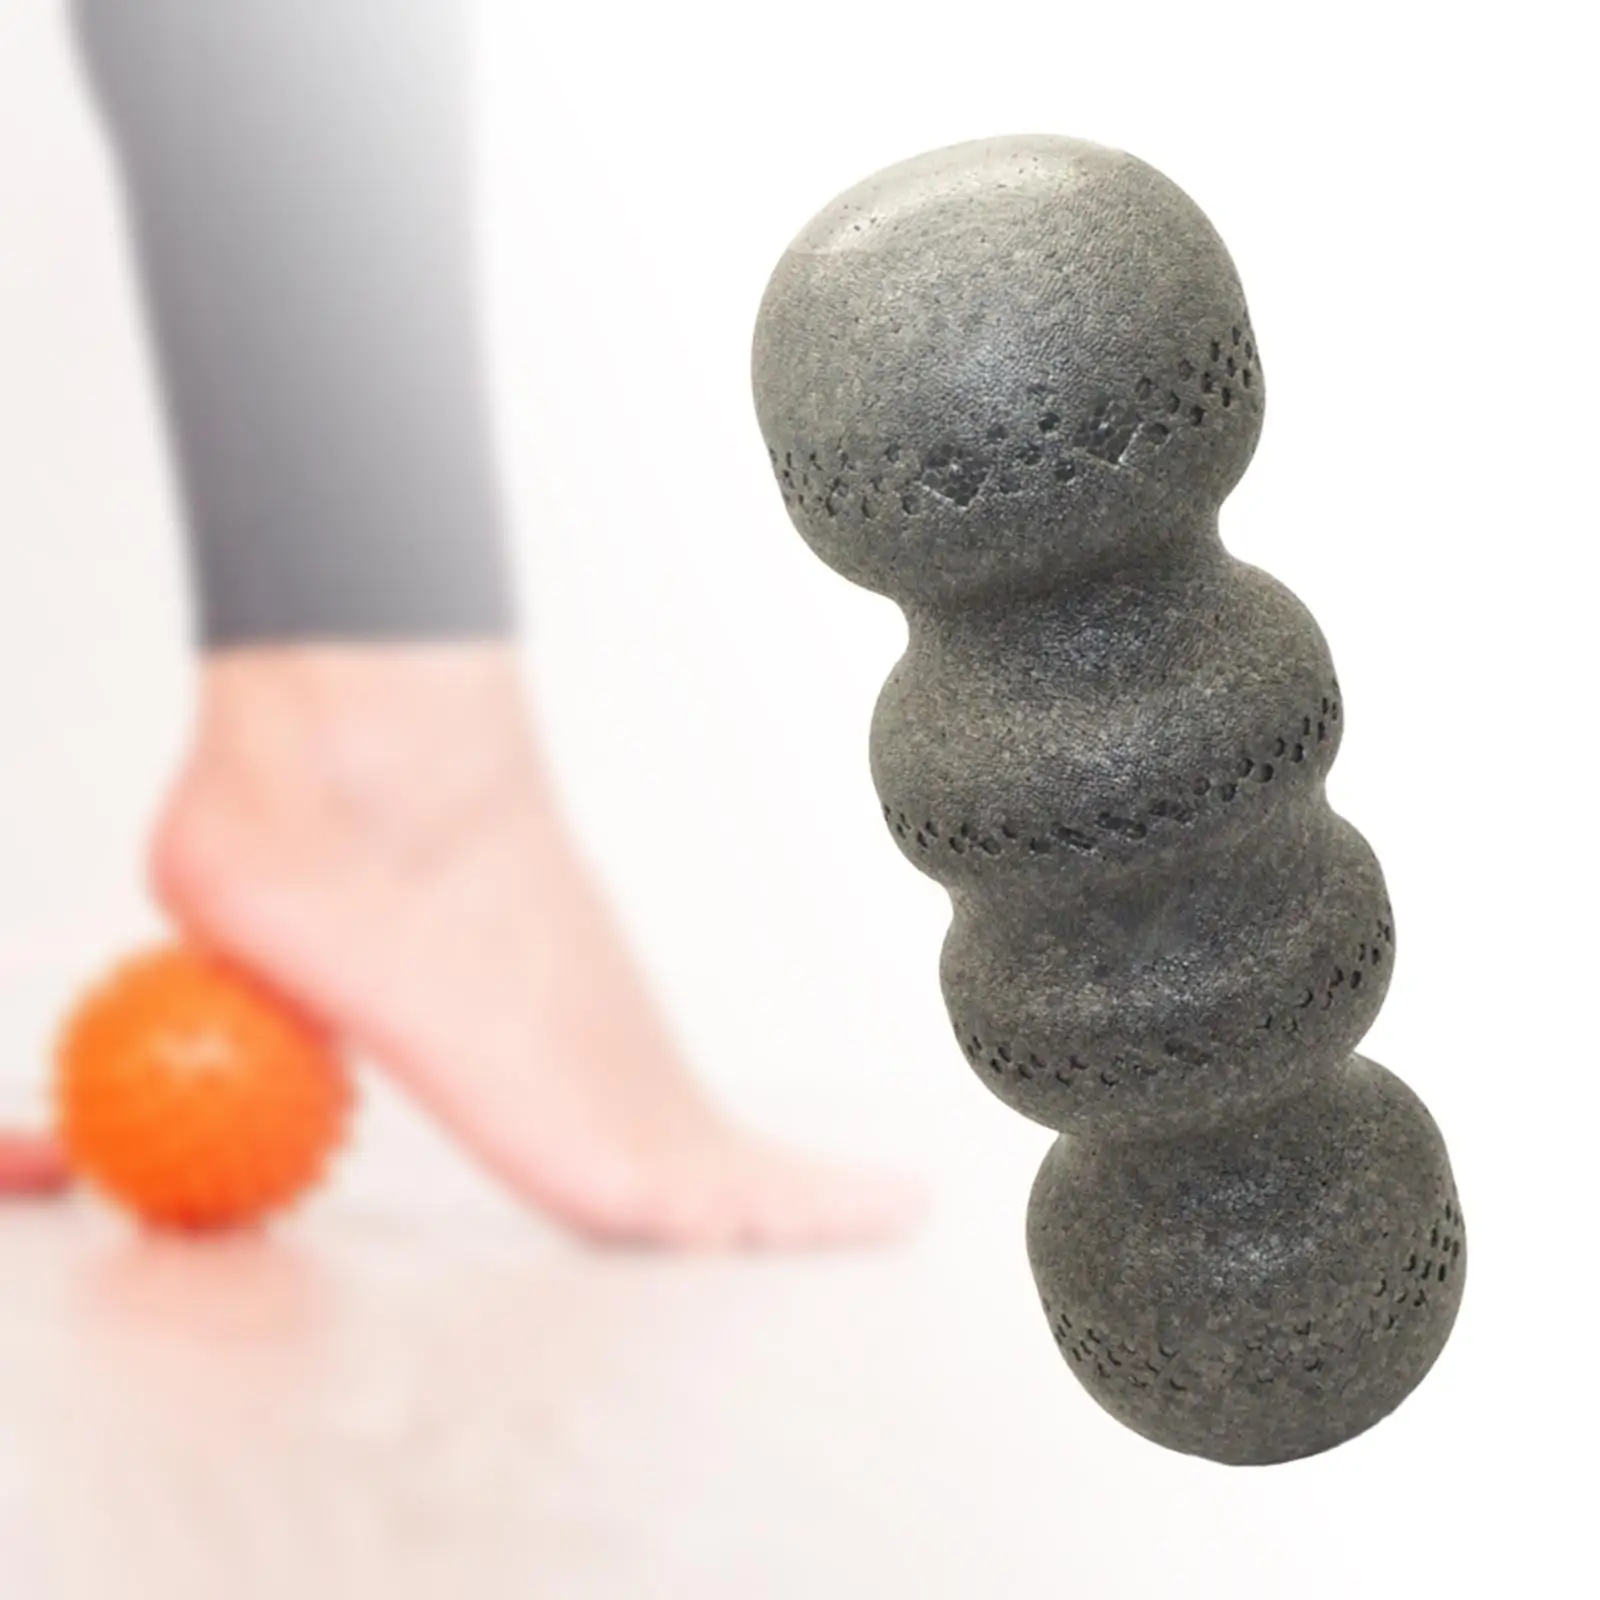 Ball Massage Release Exercise Fitness Stress Relief Tissue Tool Relax Exercise Fitness